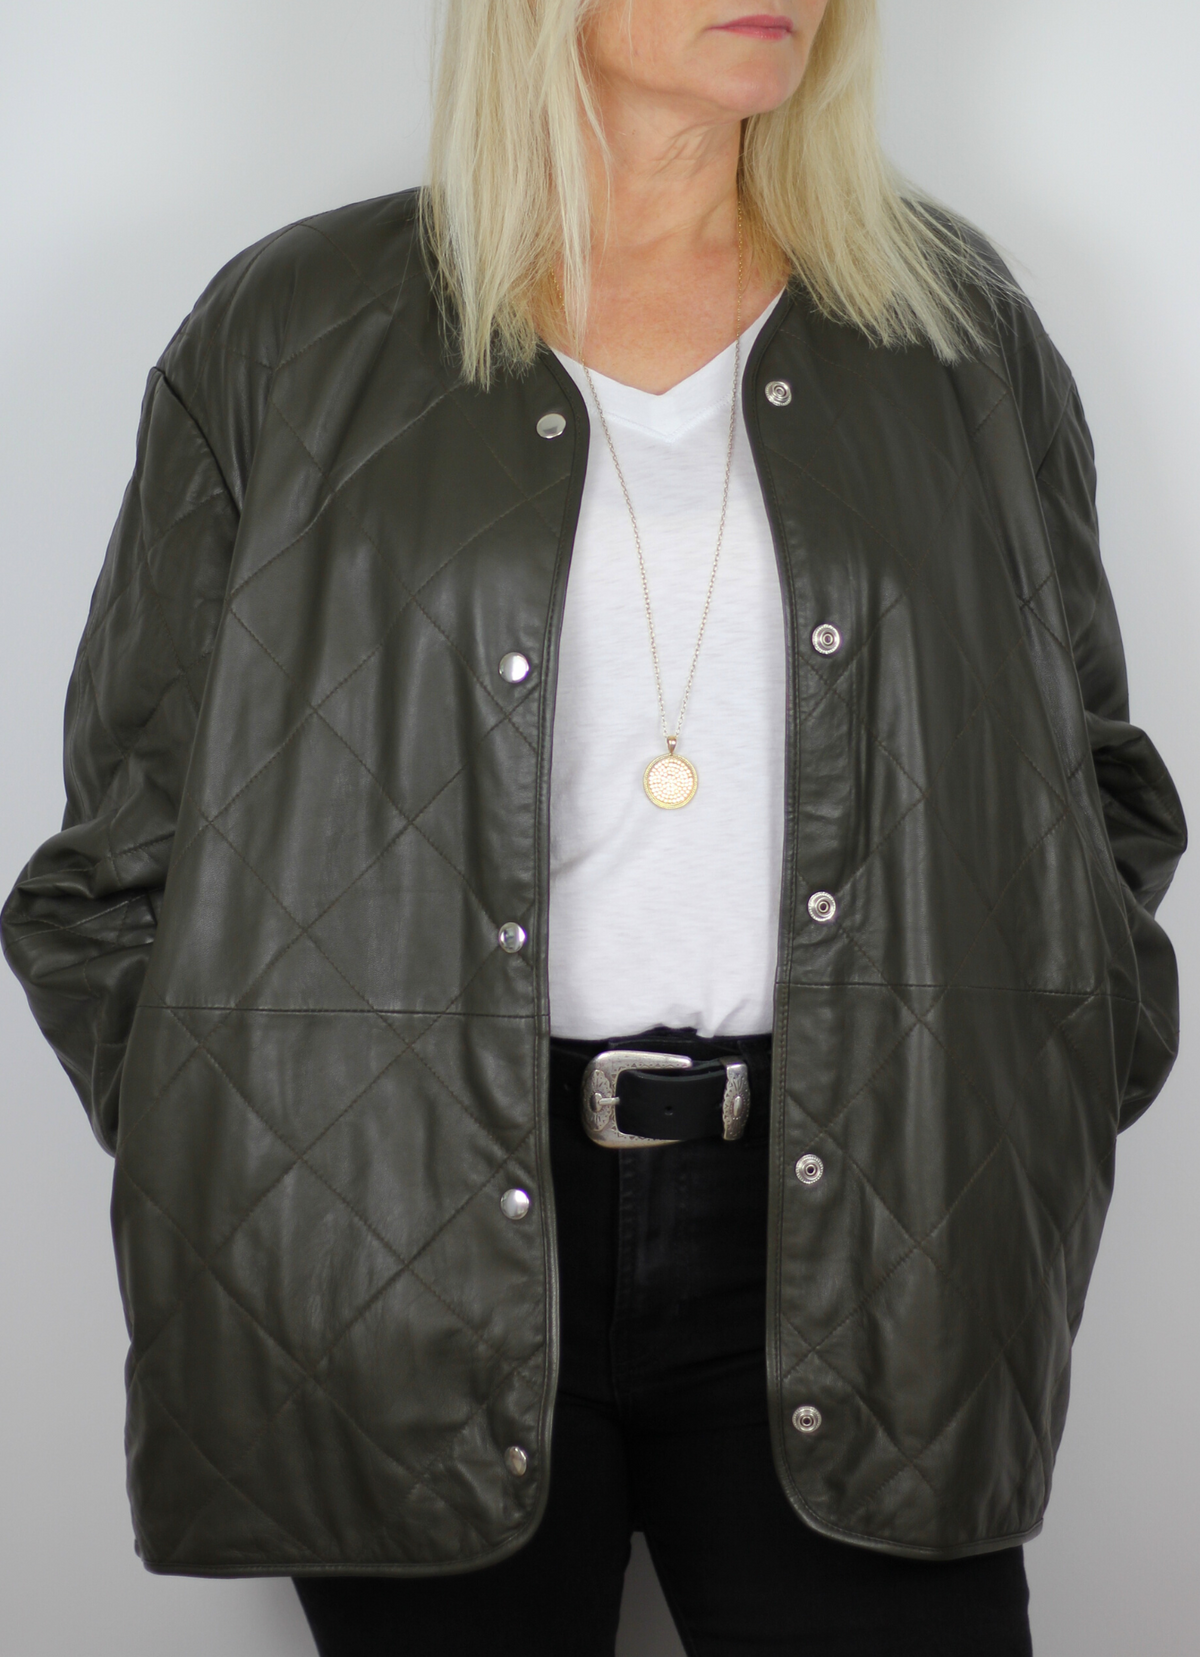 Dark green leather quilted jacket with silver popper buttons